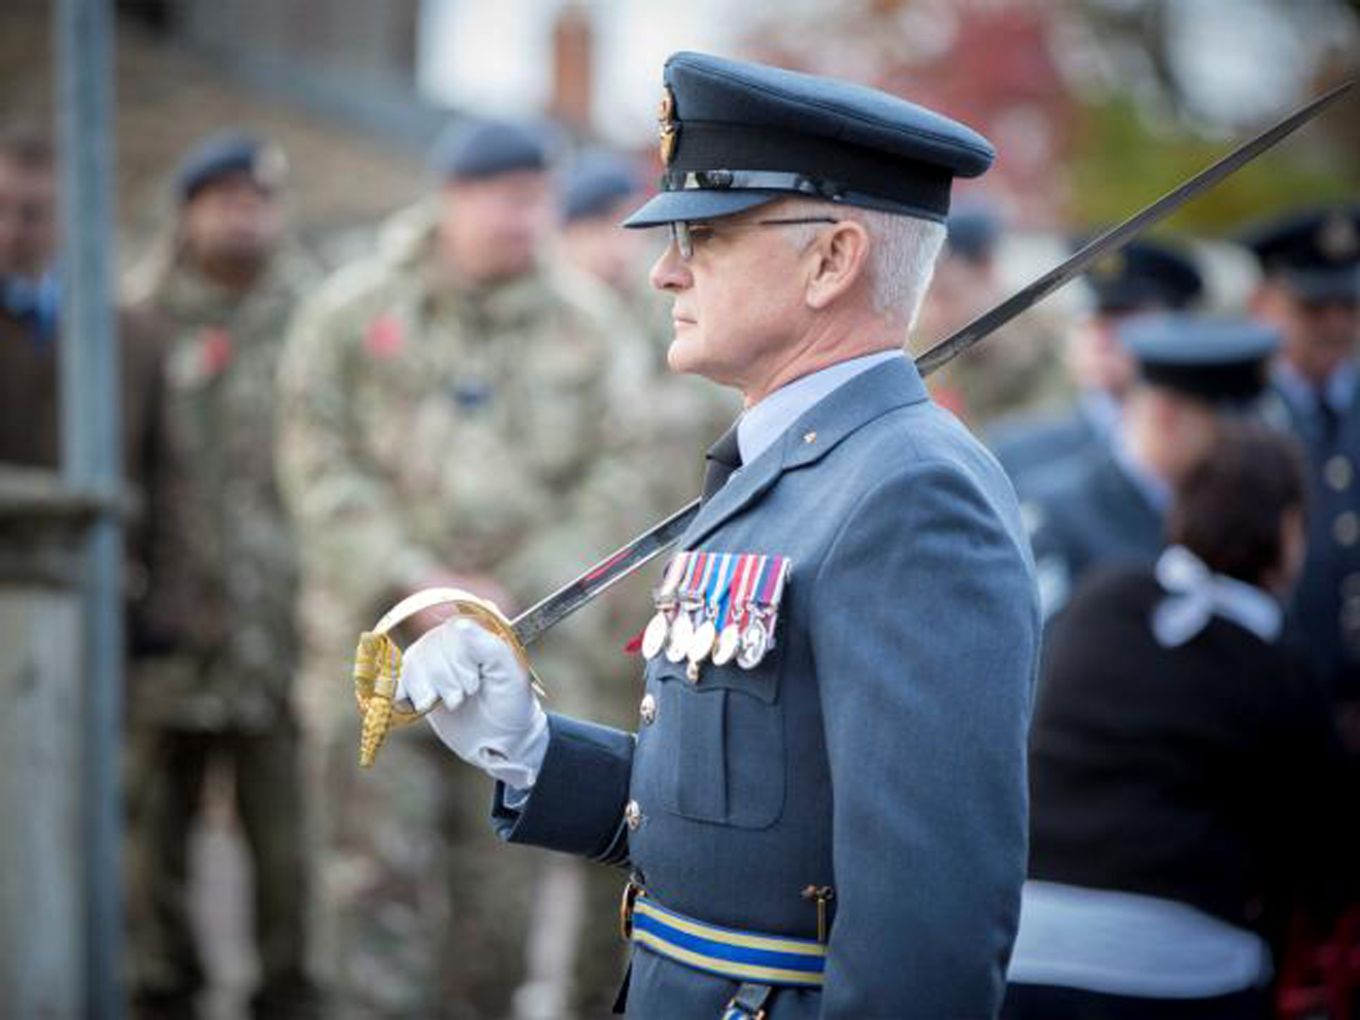 Flt Lt Winks at a Remembrance Parade in 2016